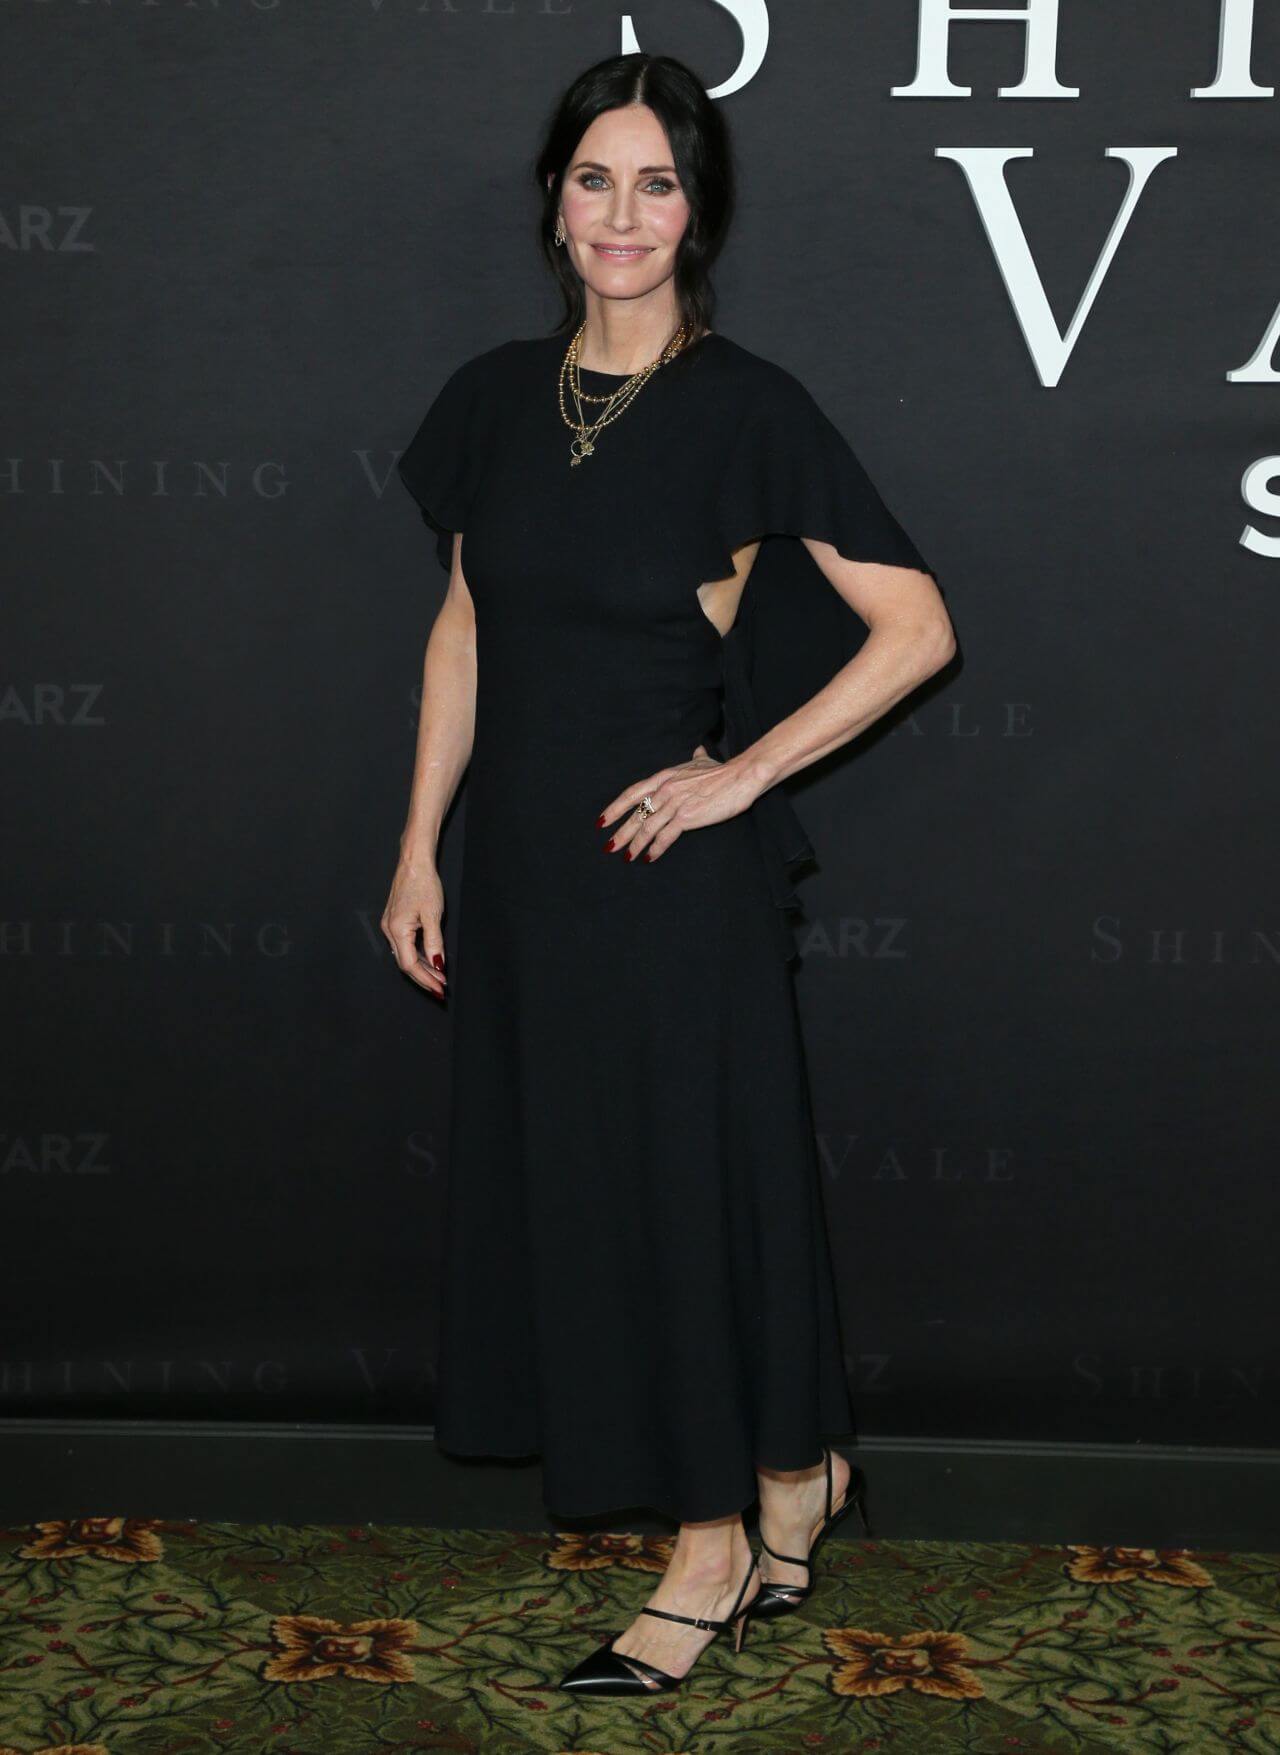 Courteney Cox  In Black Long Gown Dress At “Shining Vale” Premiere in Hollywood